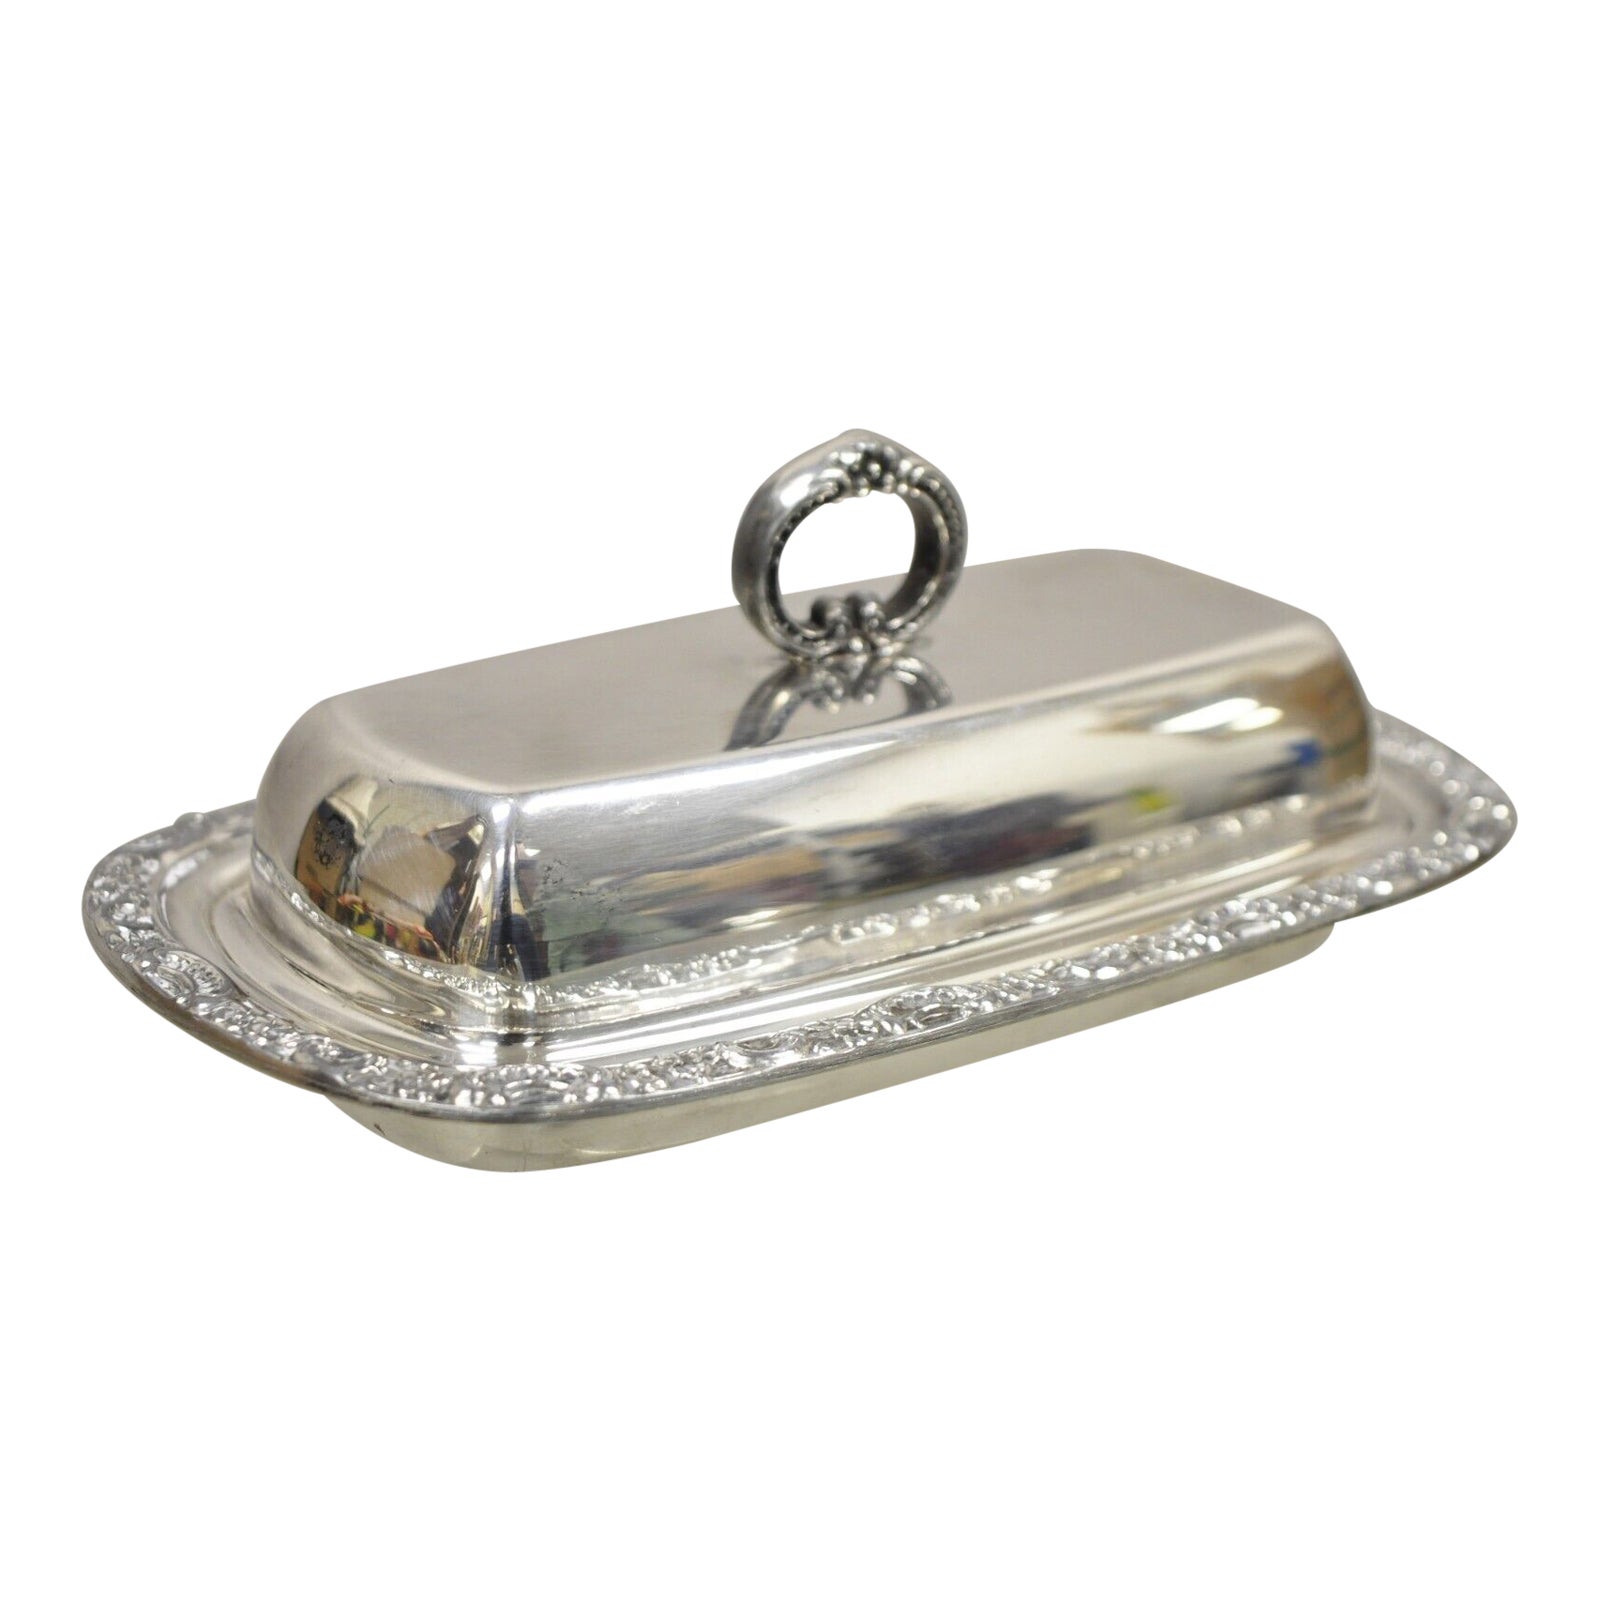 Vintage Newport Silver Plated Covered Butter Dish Tray with Lid